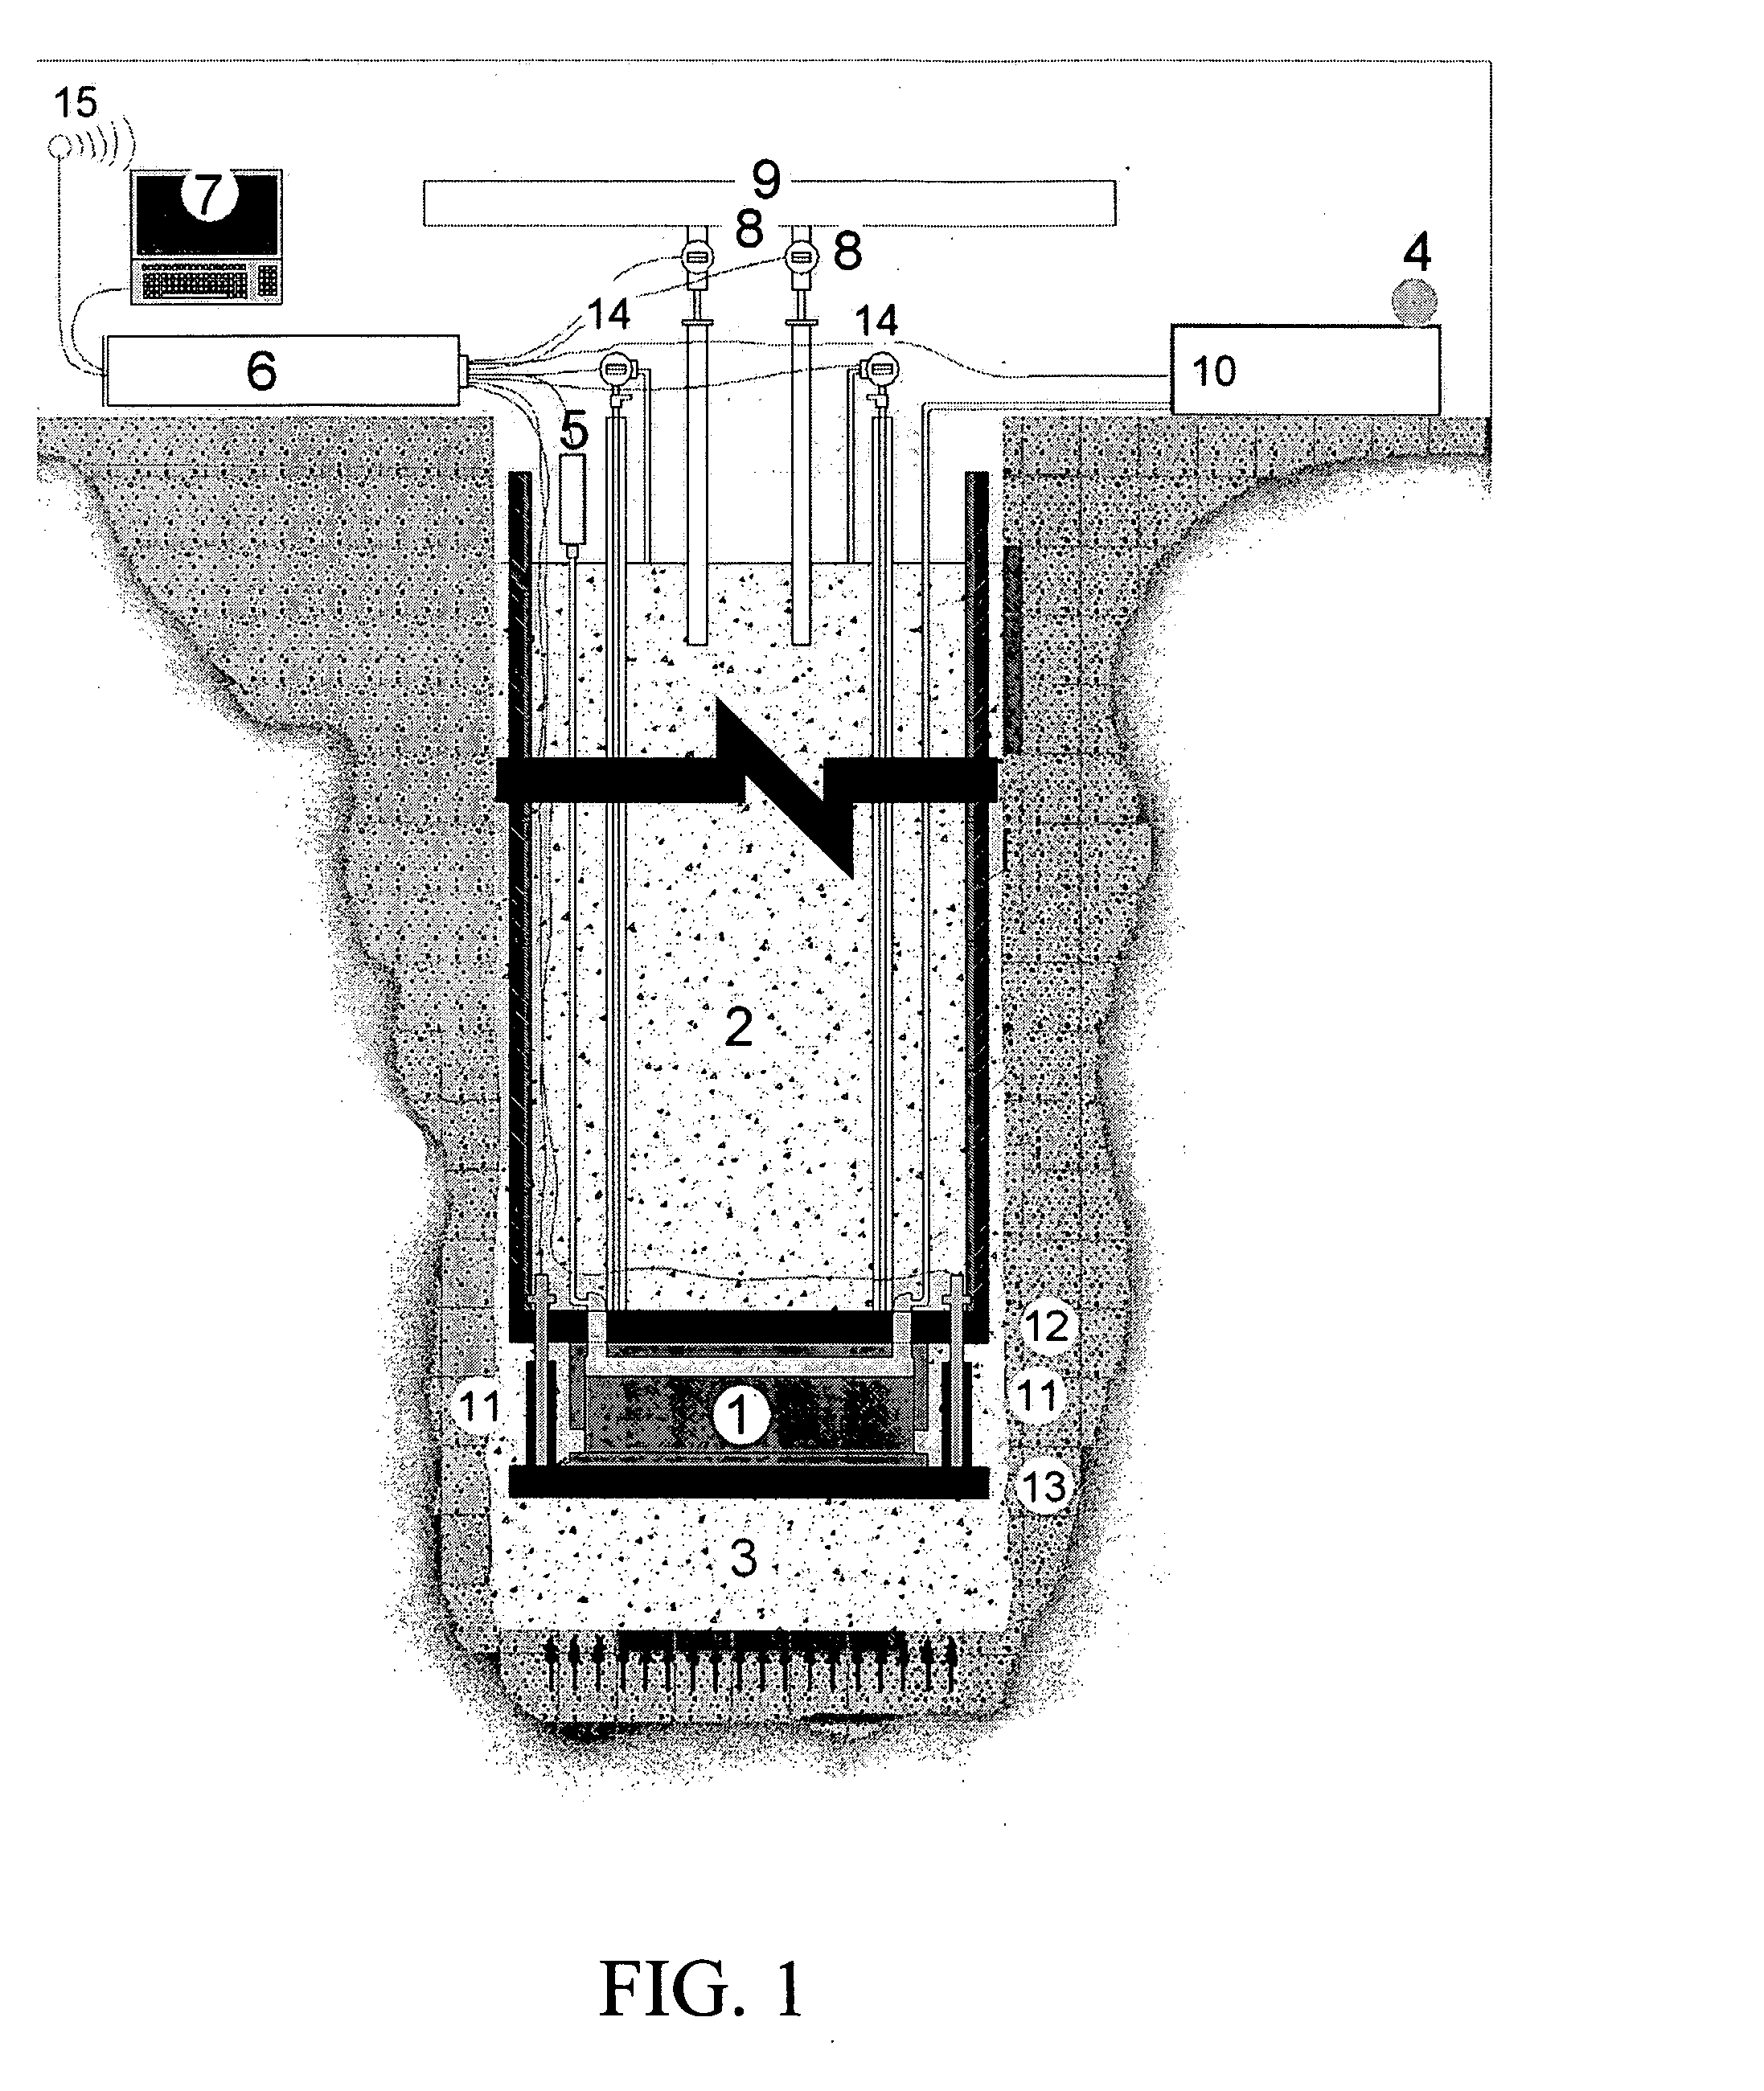 Method and apparatus for automatic load testing using bi-directional testing